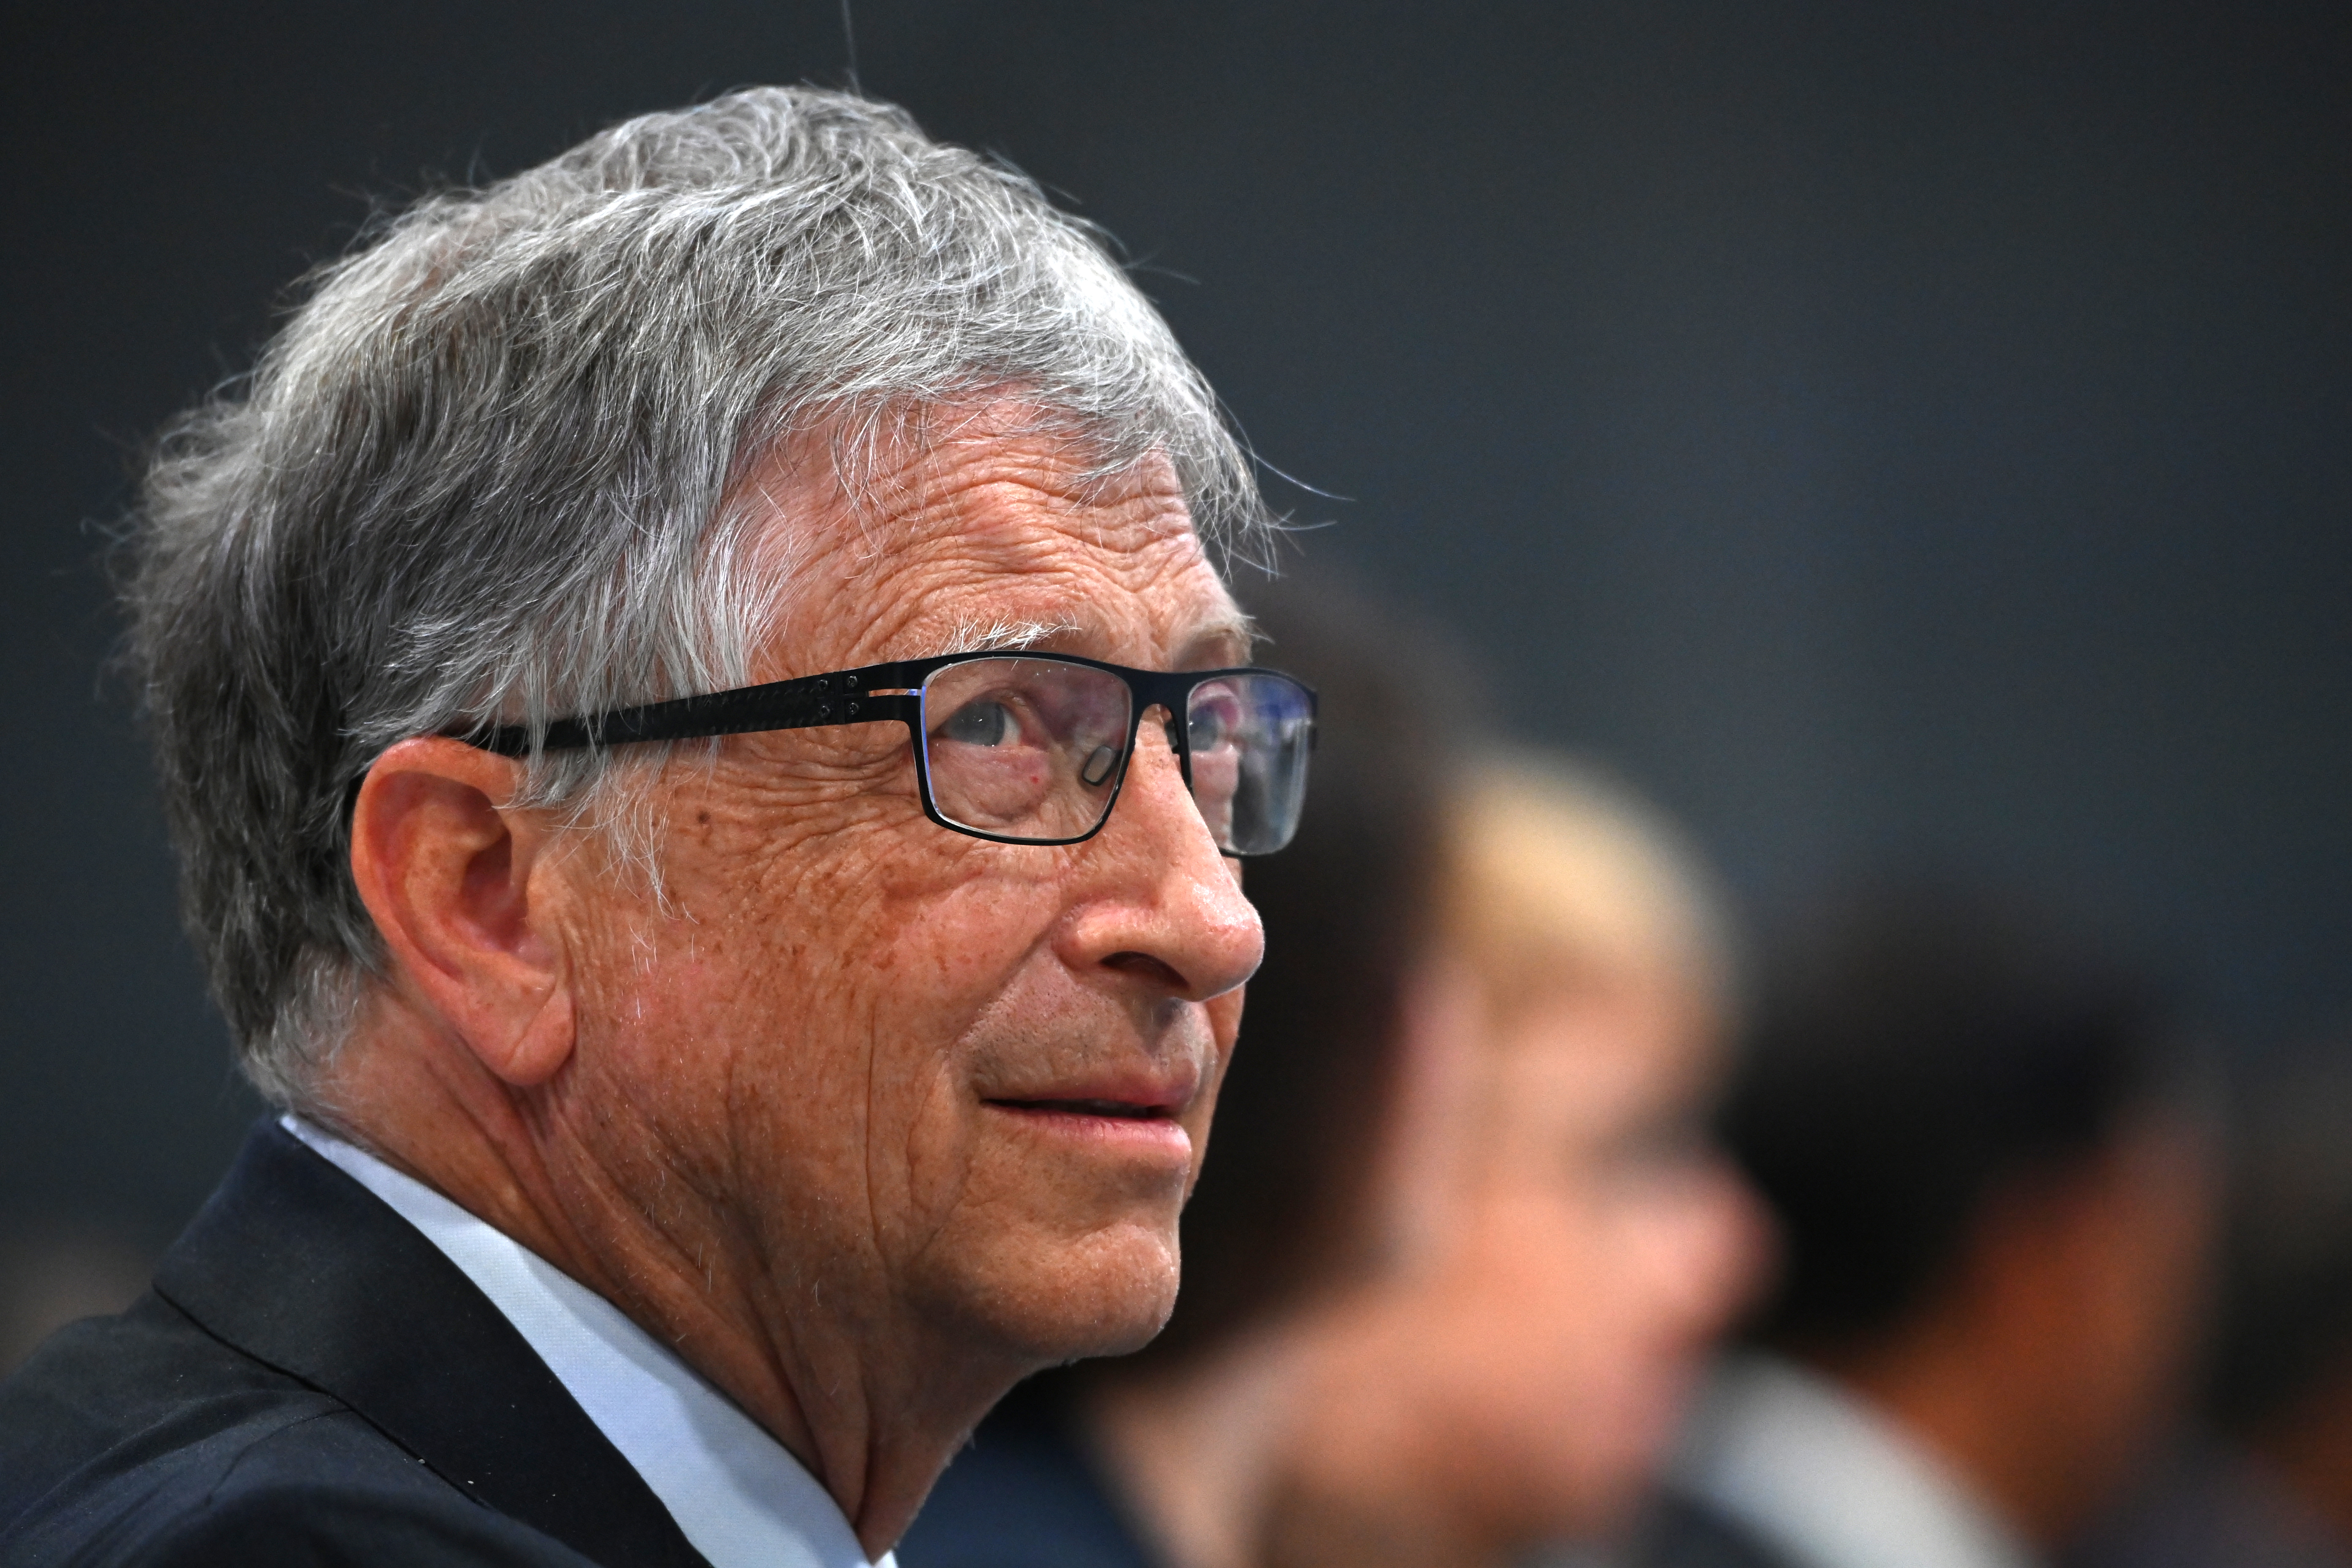 Bill Gates was among a ‘wide range’ of CEOs and labor bosses who lobbied to change Manchin’s mind on the Inflation Reduction Act: report